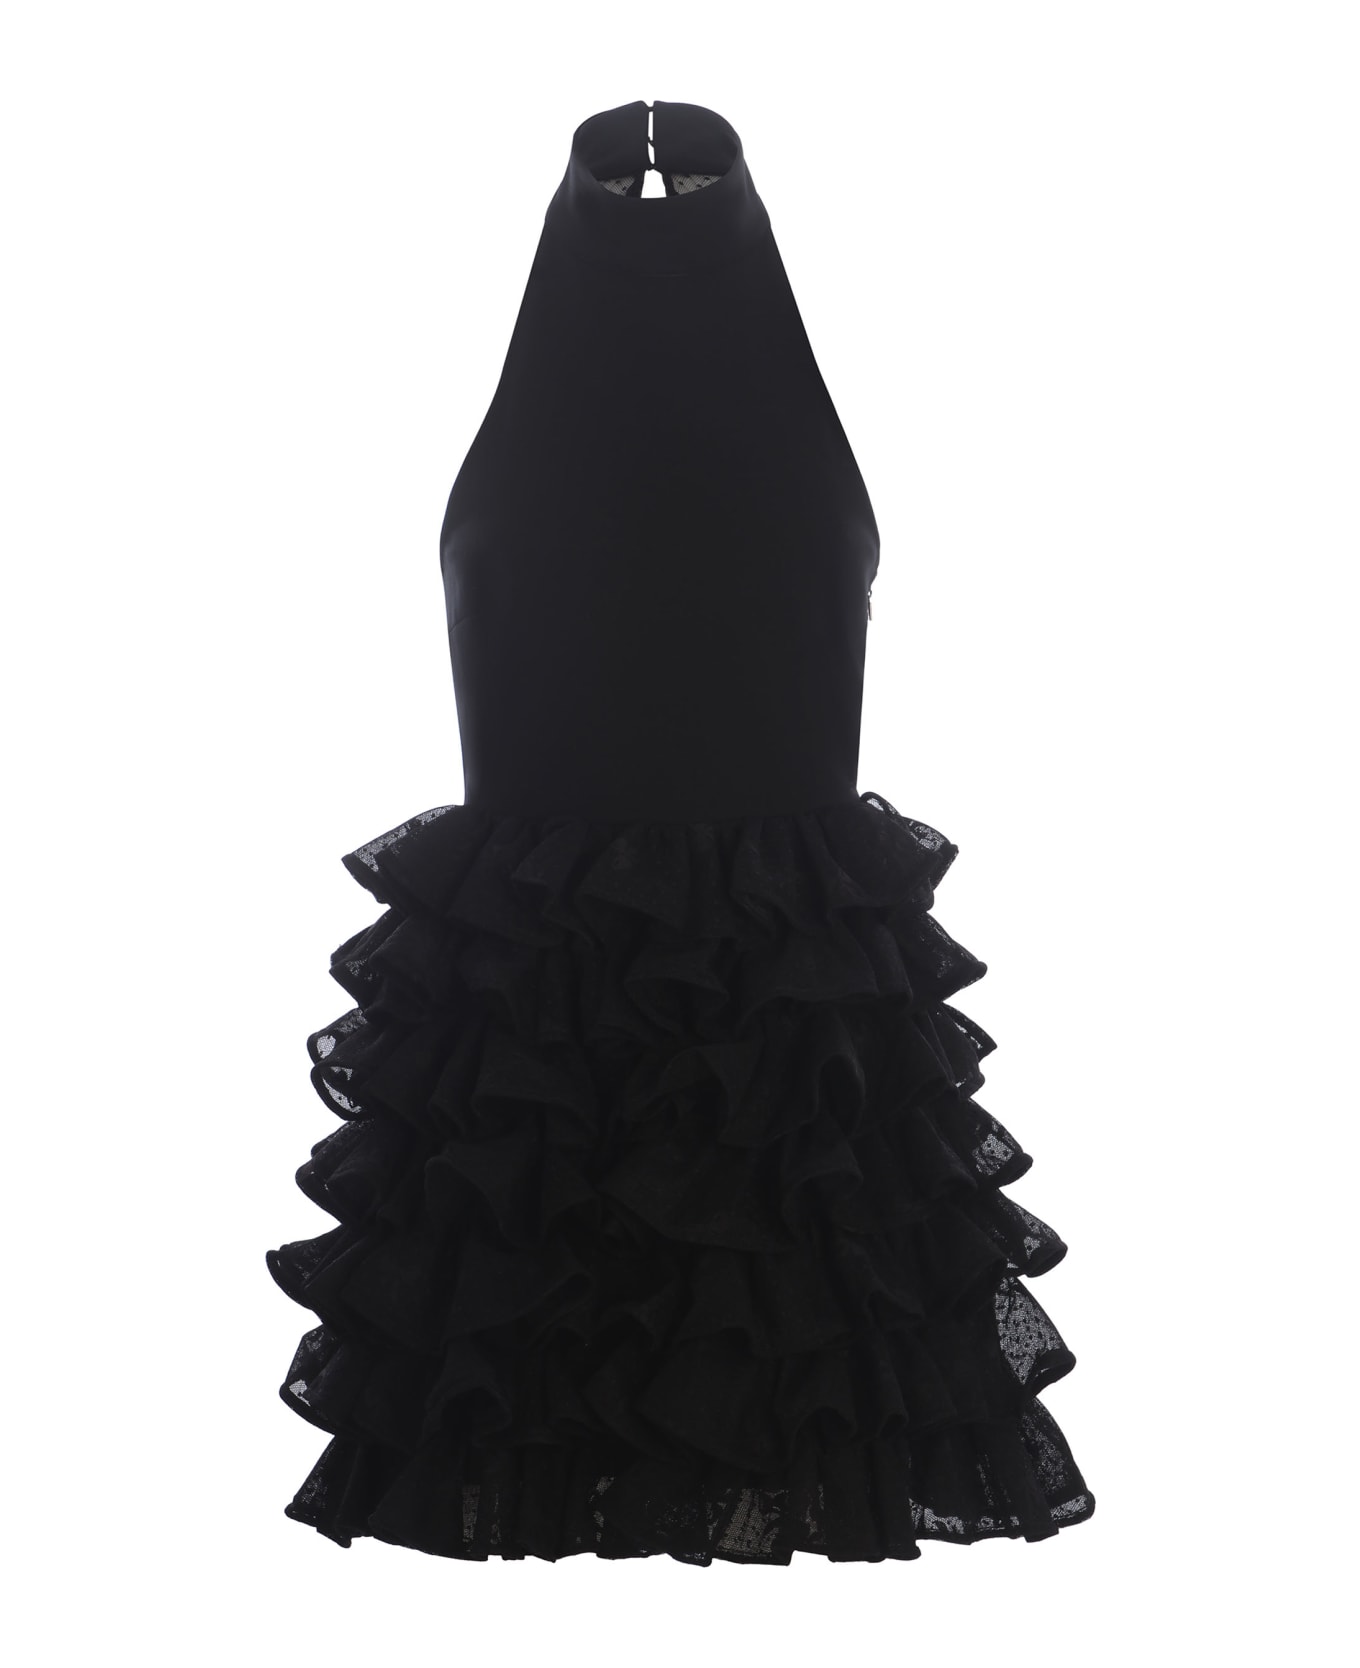 Rotate by Birger Christensen Dress Rotate "bow" Made Of Viscose - Nero